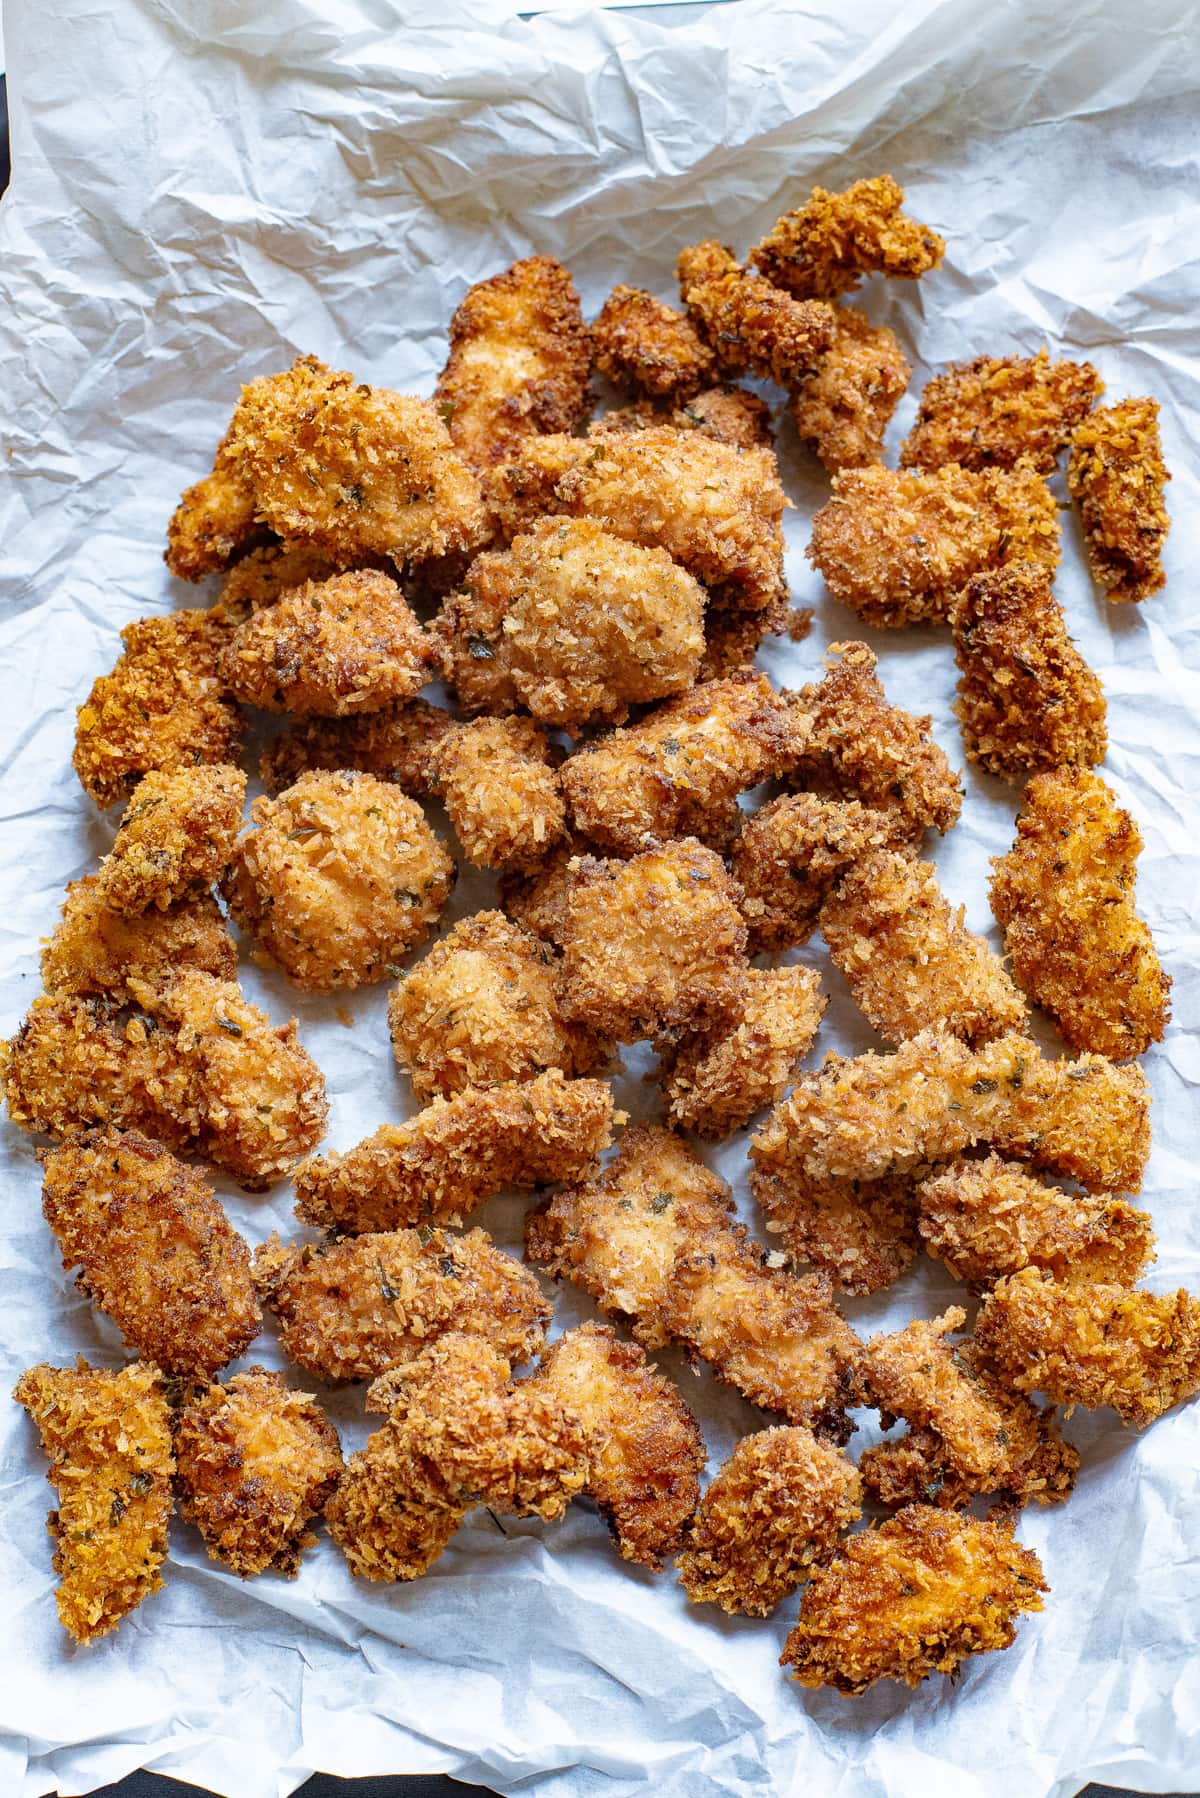 Overhead view of pieces of popcorn chicken